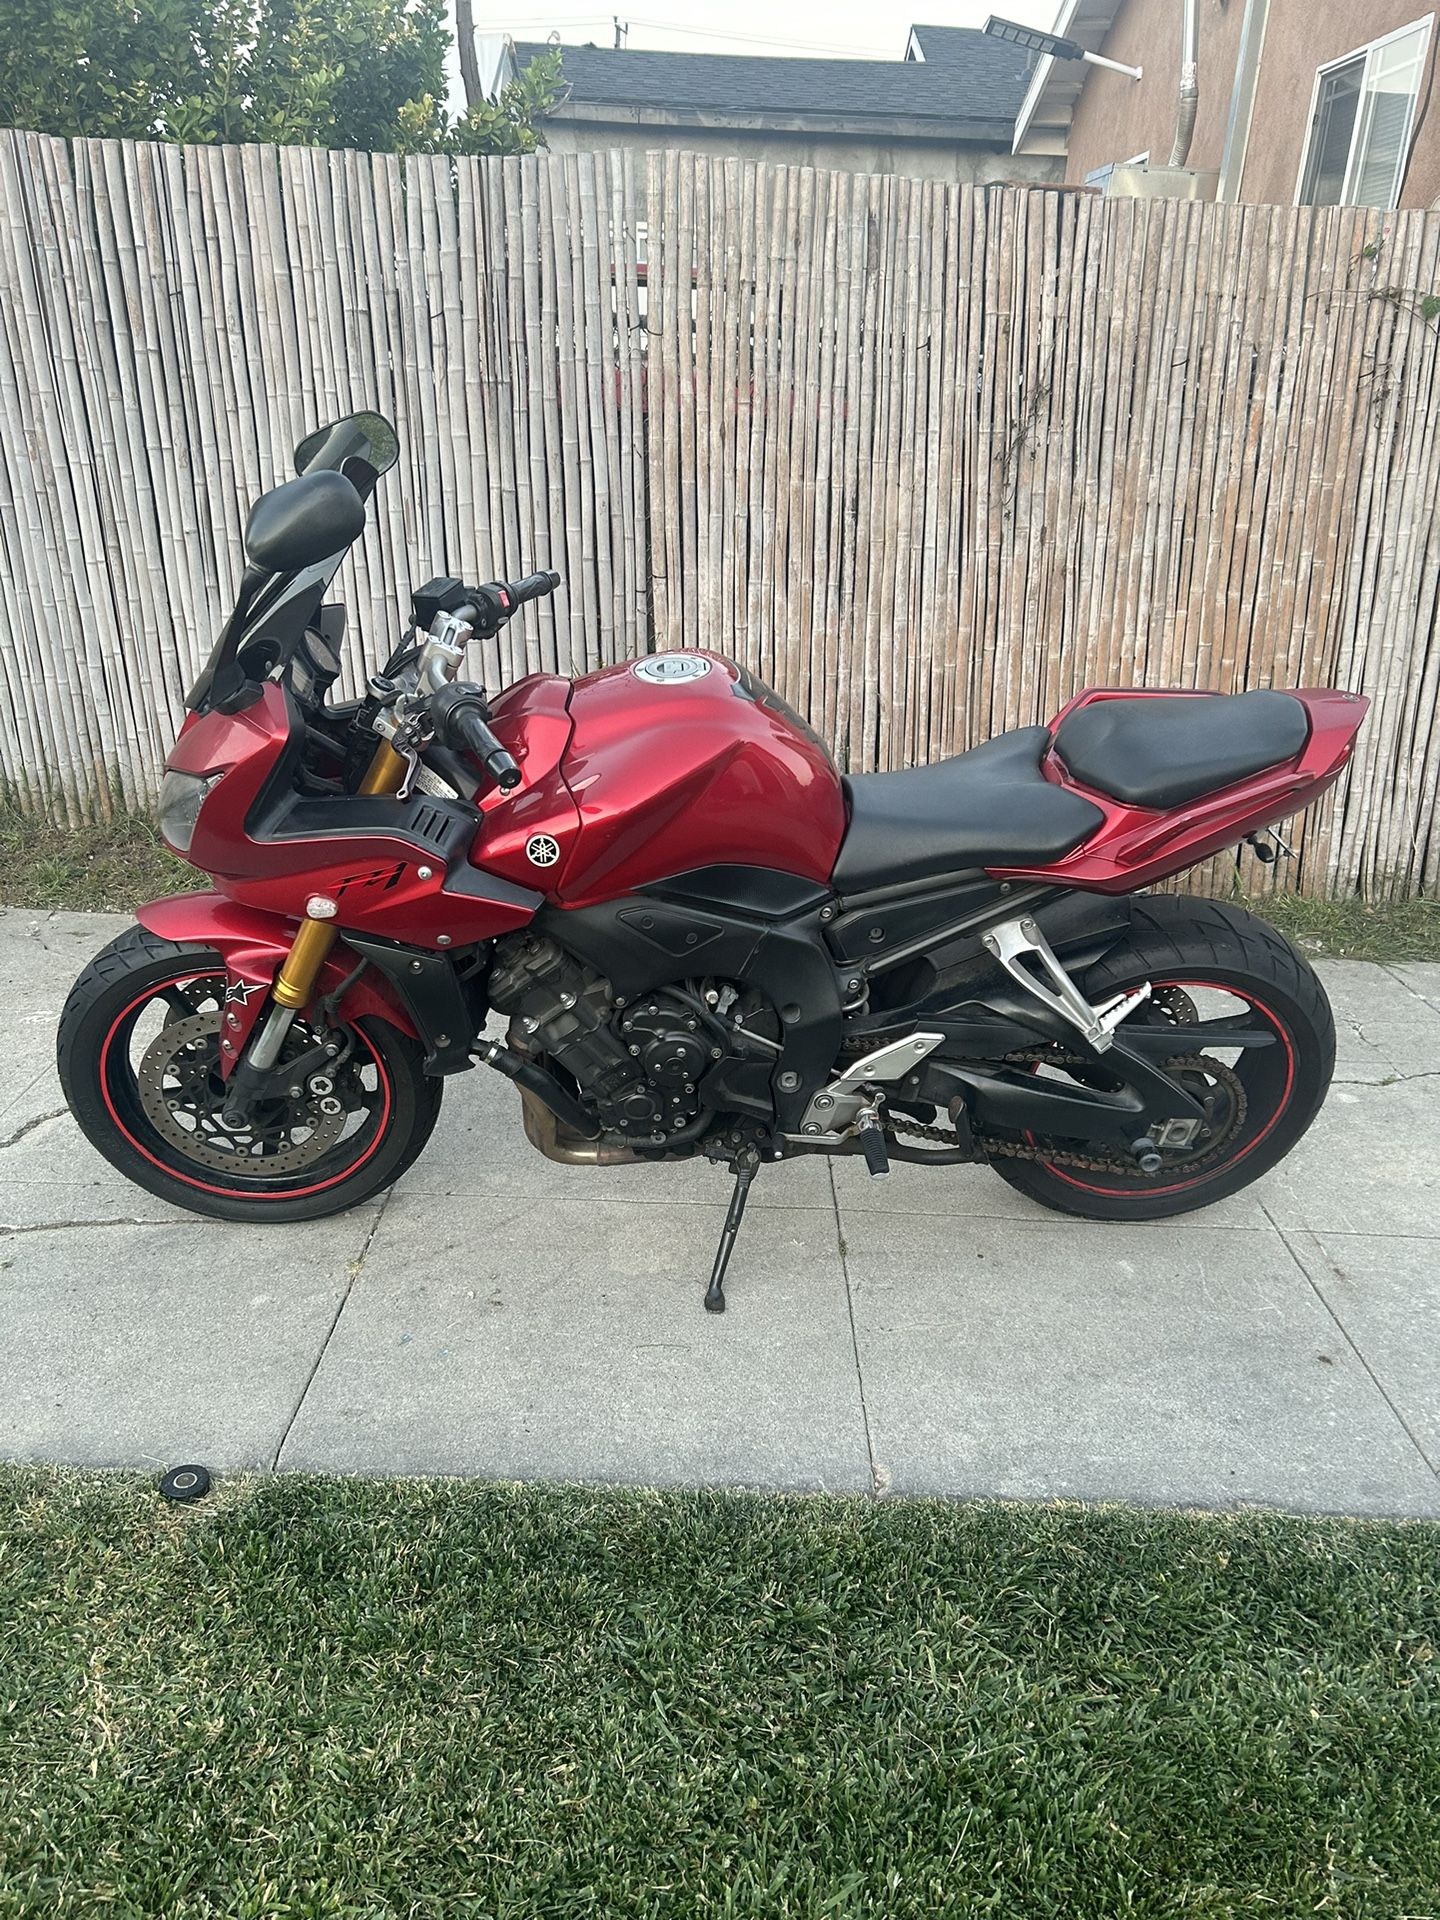 05 Fz1 Yamaha Commuter Bike High Miles But Priced To Sell